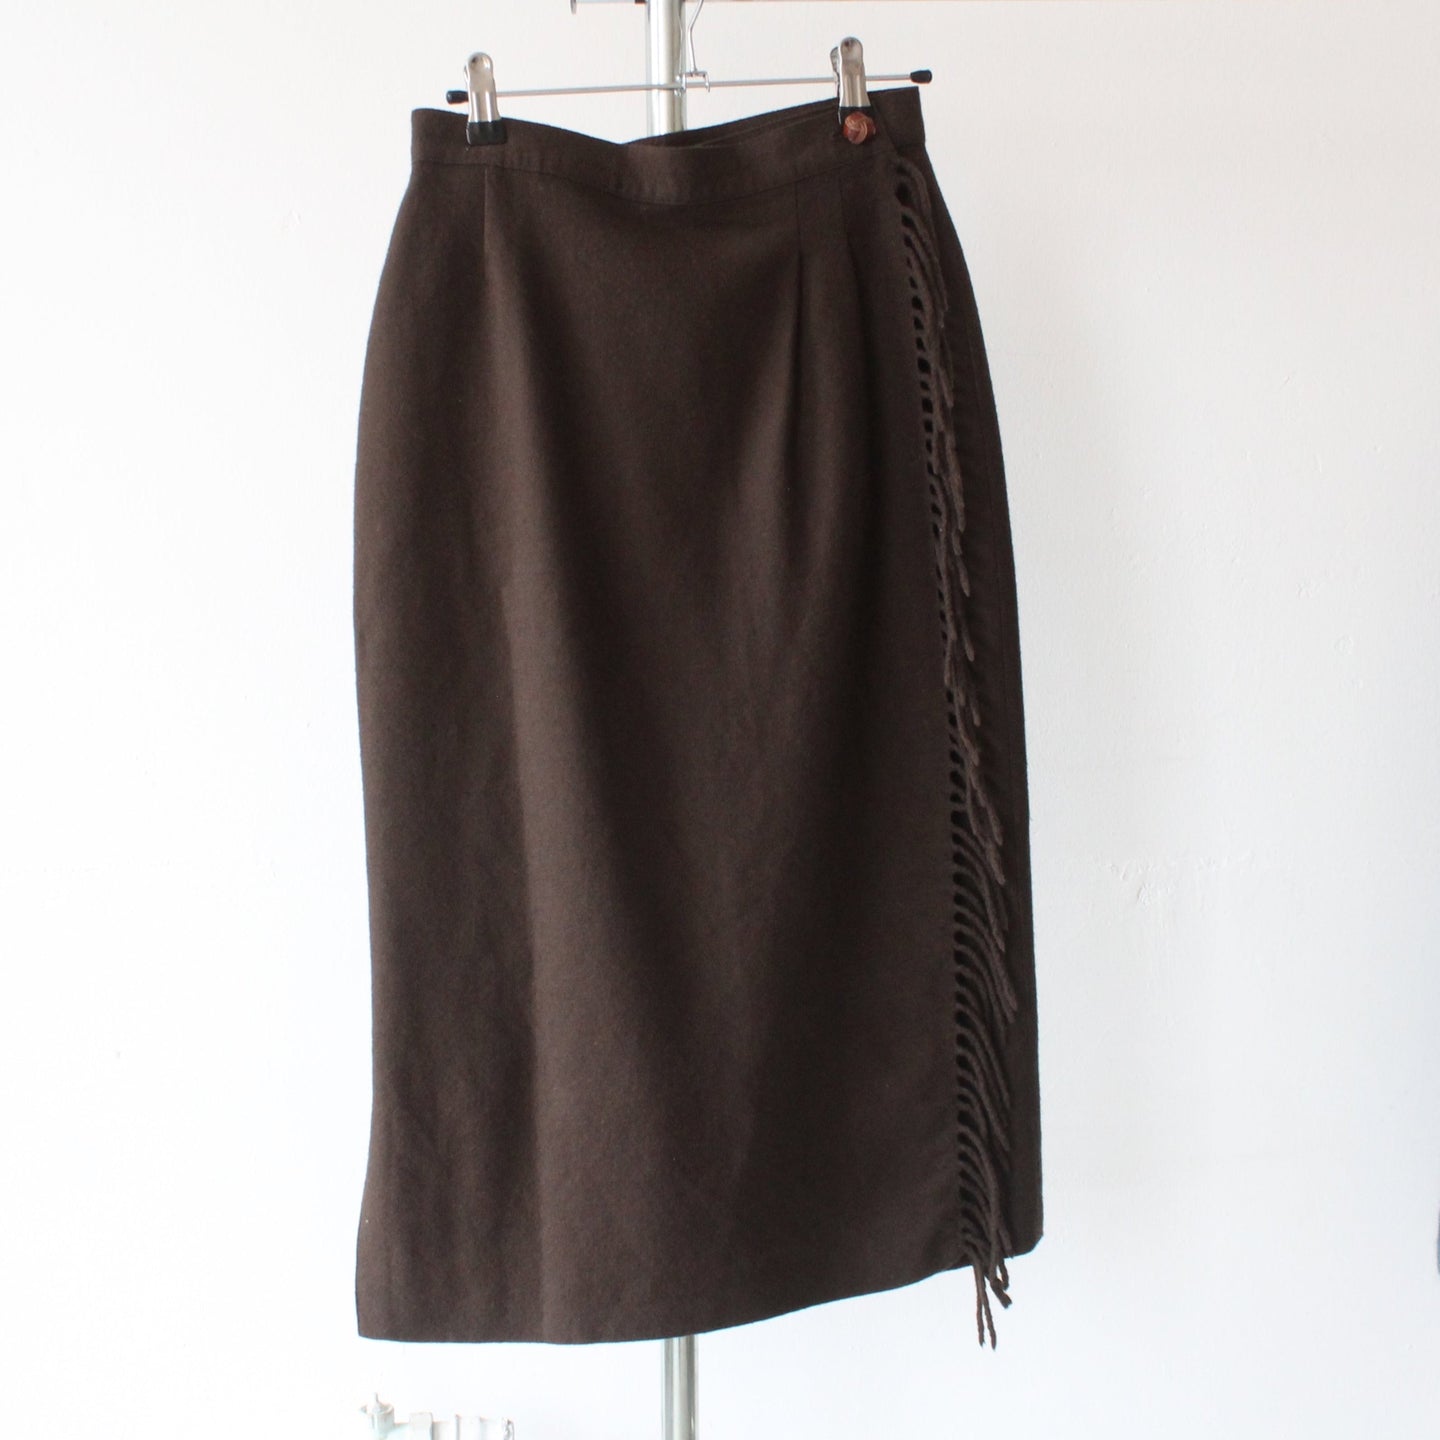 Vintage wool mid length skirt with fringe, size XS